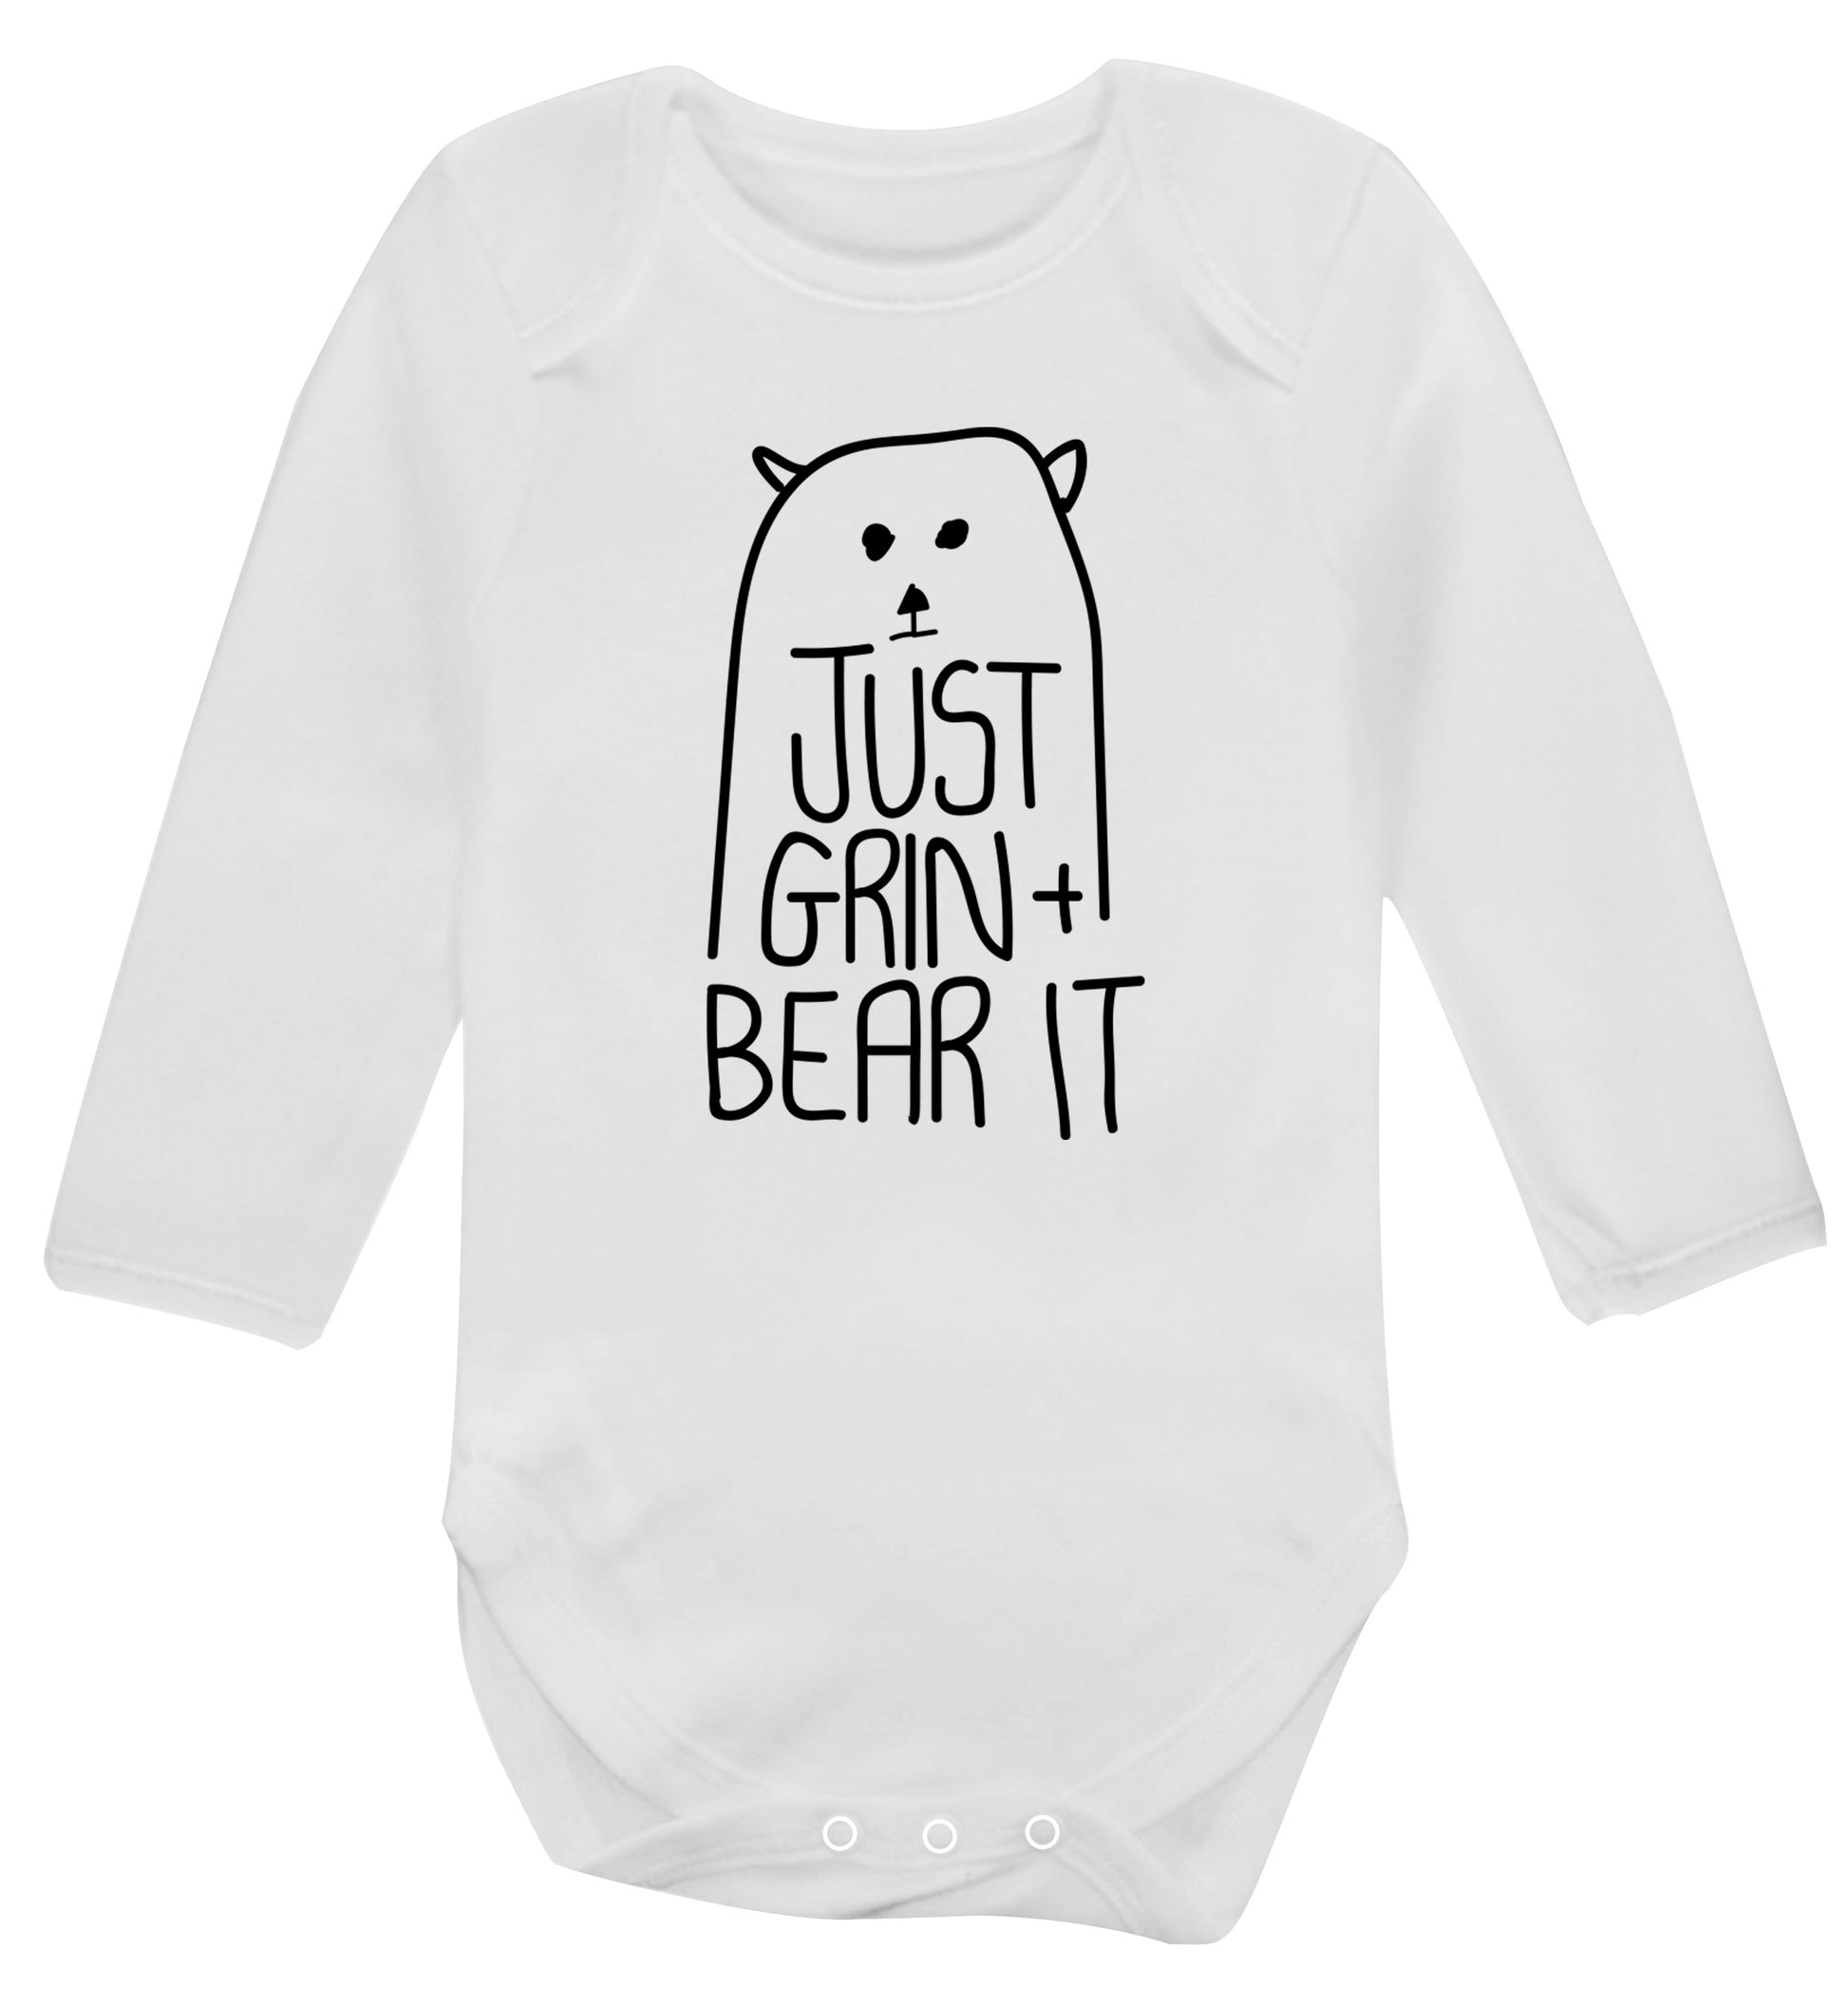 Just grin and bear it Baby Vest long sleeved white 6-12 months